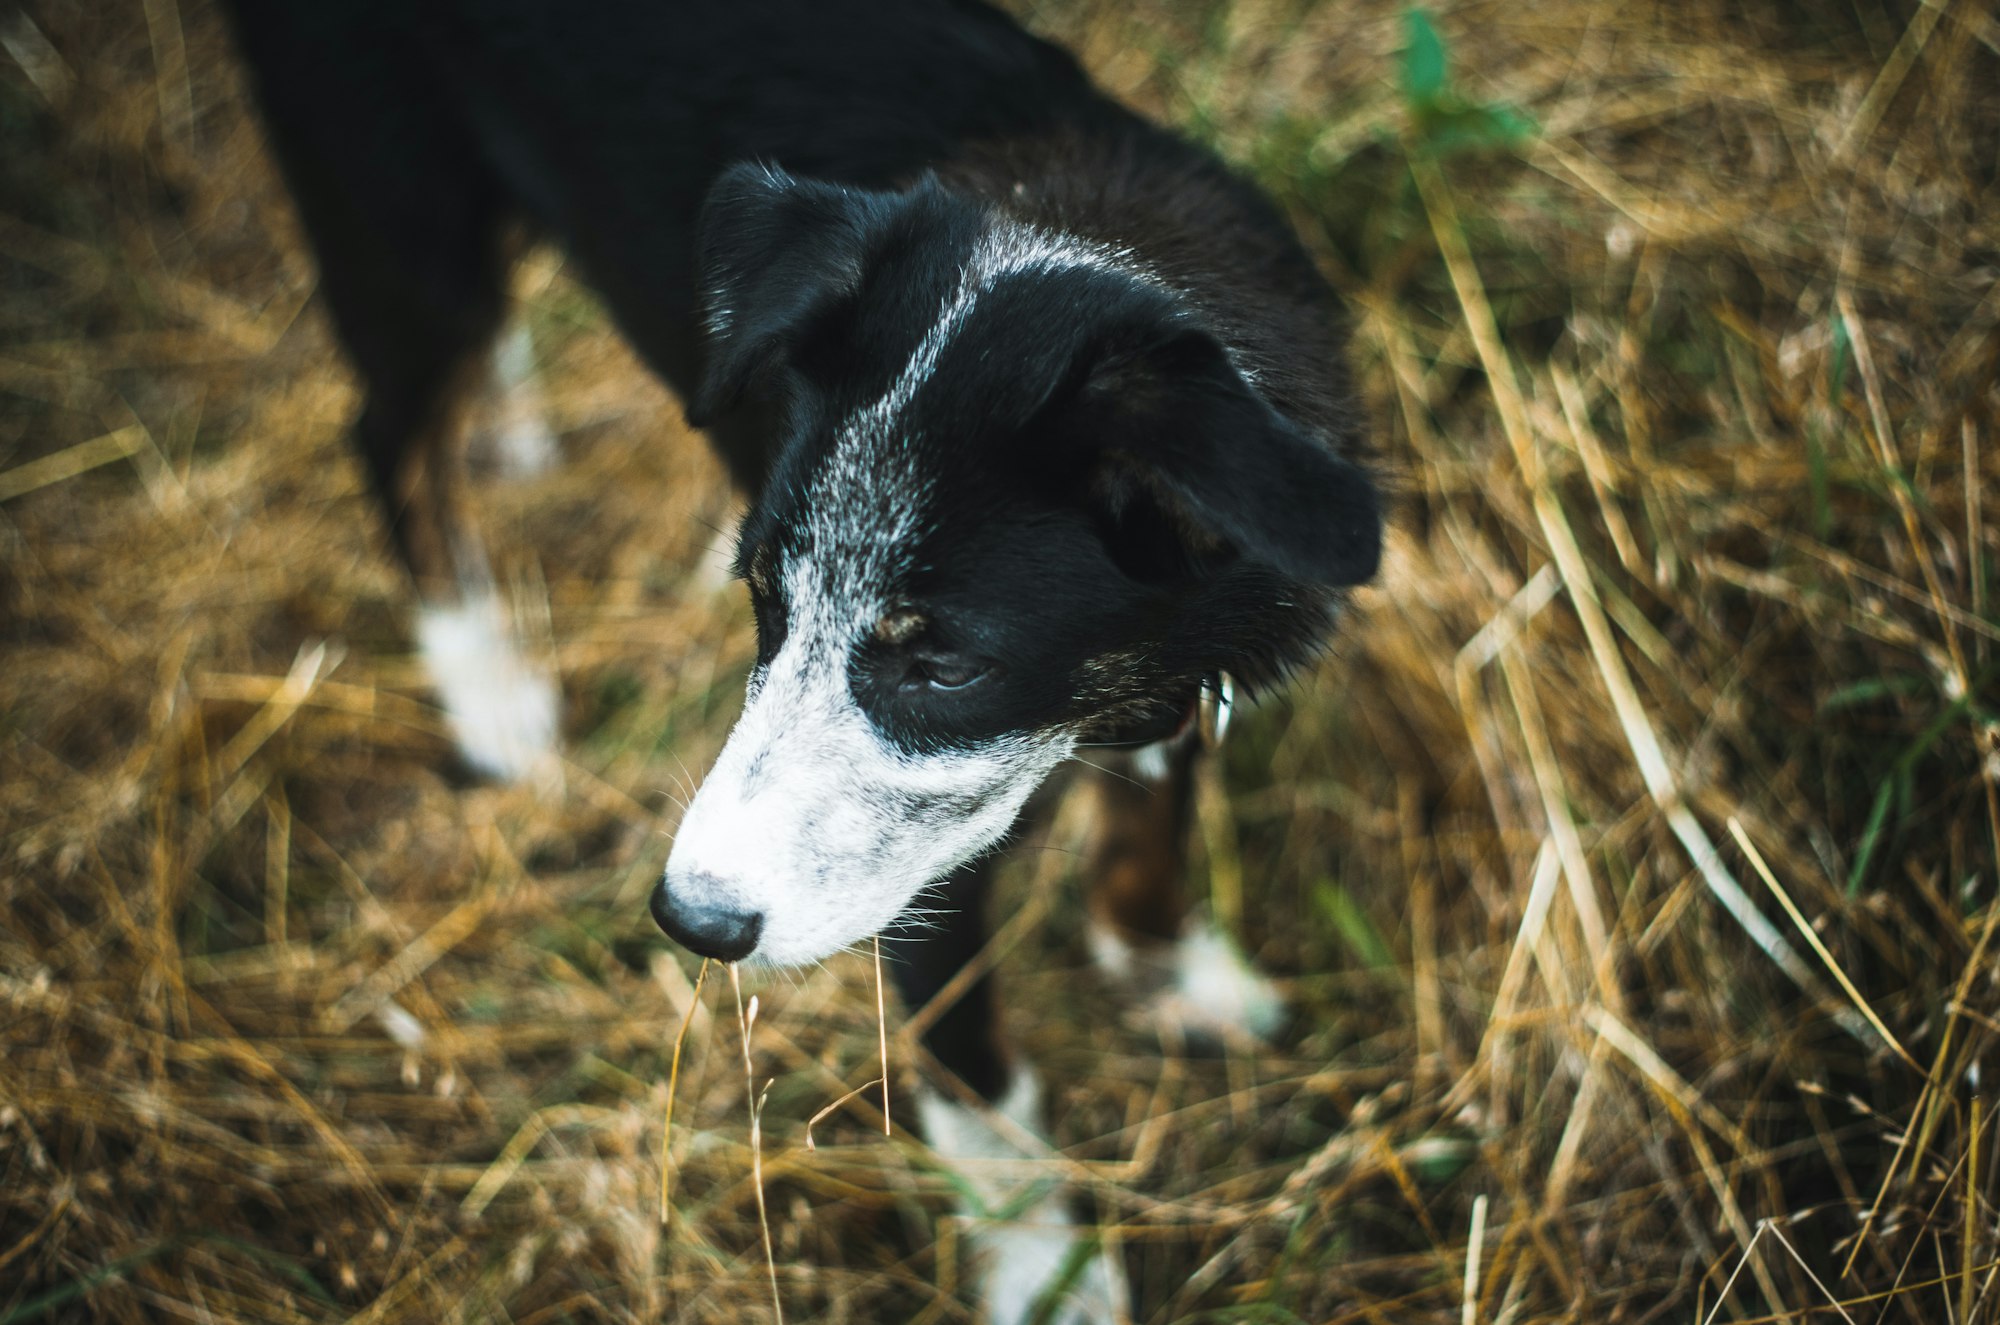 cattleline border collie puppy in yellow hay or yellow grass / field ; dark moody photo 

"Yet for all their willingness to give they are not submissive, they are proud of their heritage and they do not suffer fools gladly." - Barbara Sykes, Training Border Collies  // CC0 Public Domain Image